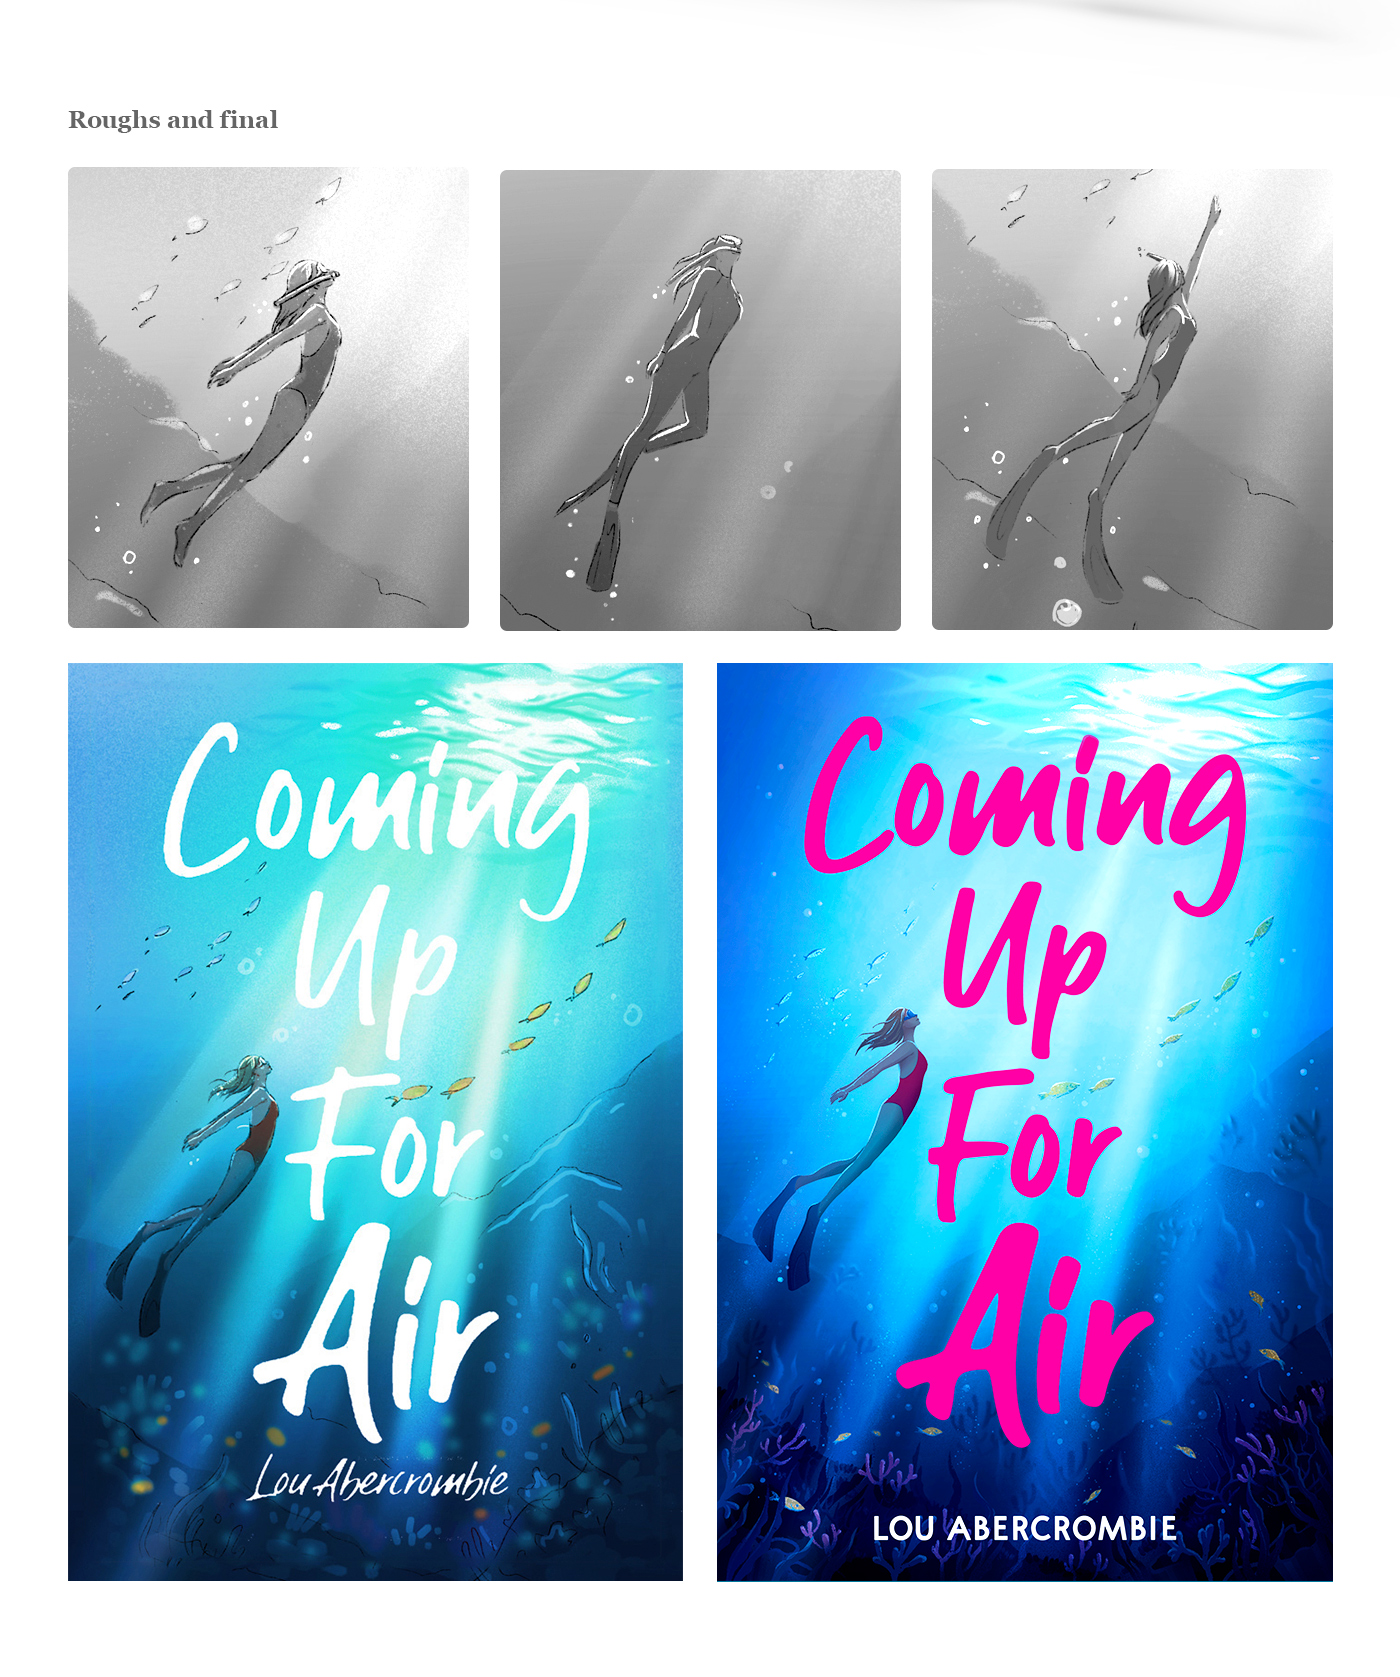 Coming-up-for-air_book-cover-art-by-anna-kuptsova_03